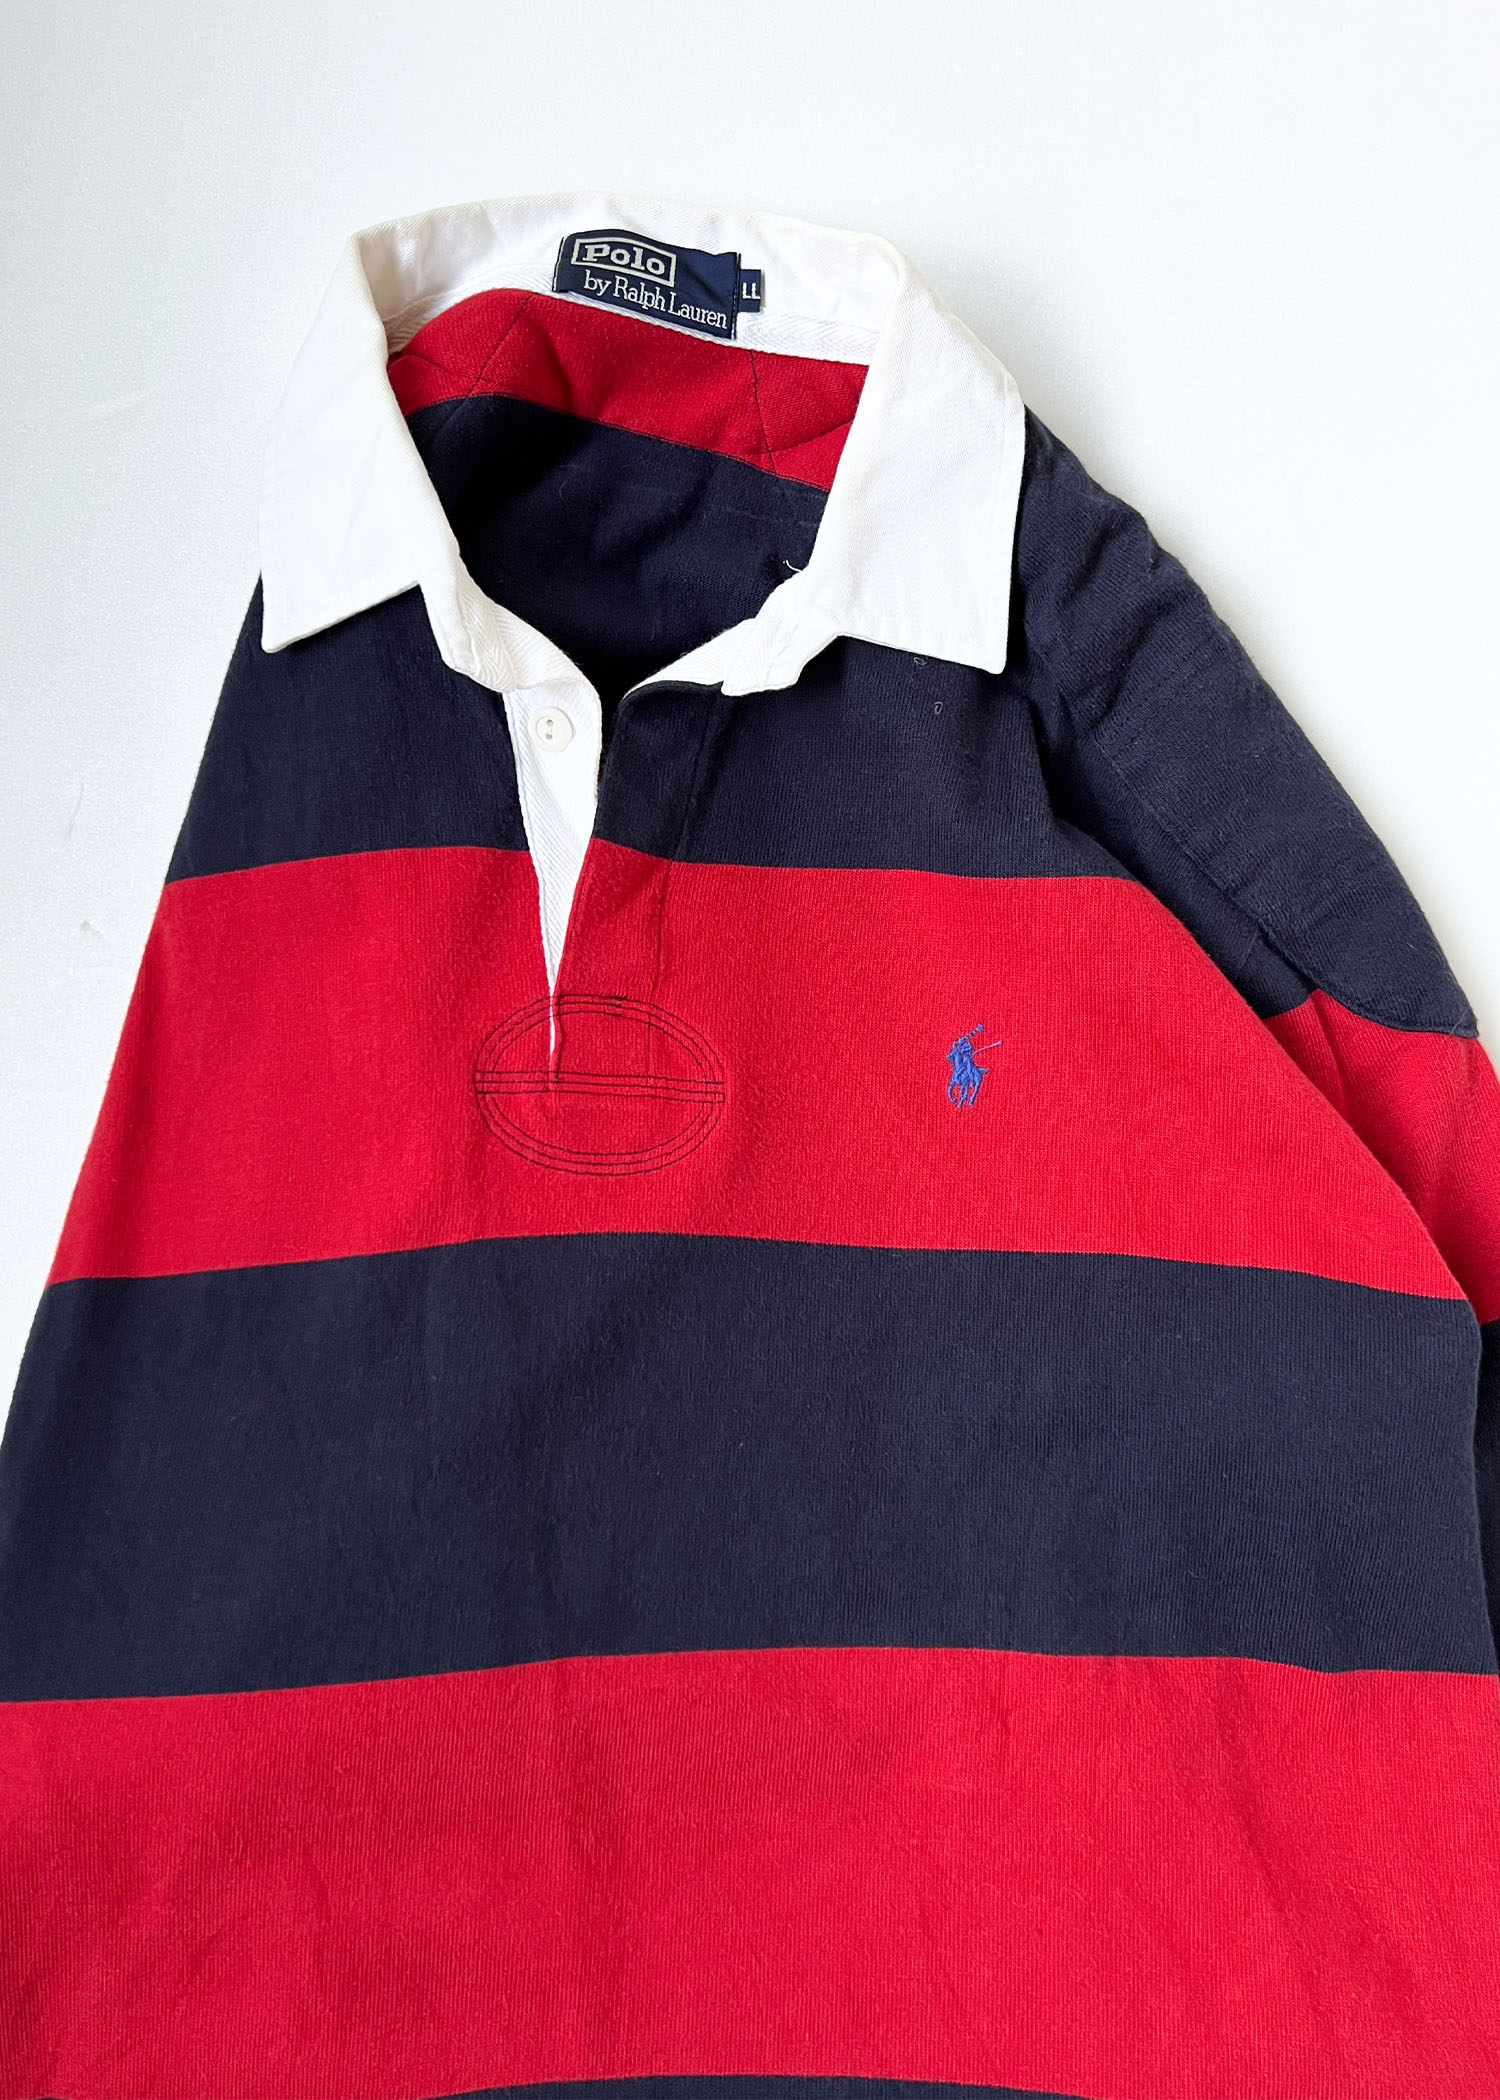 Polo by Ralph Lauren stripe rugby shirts